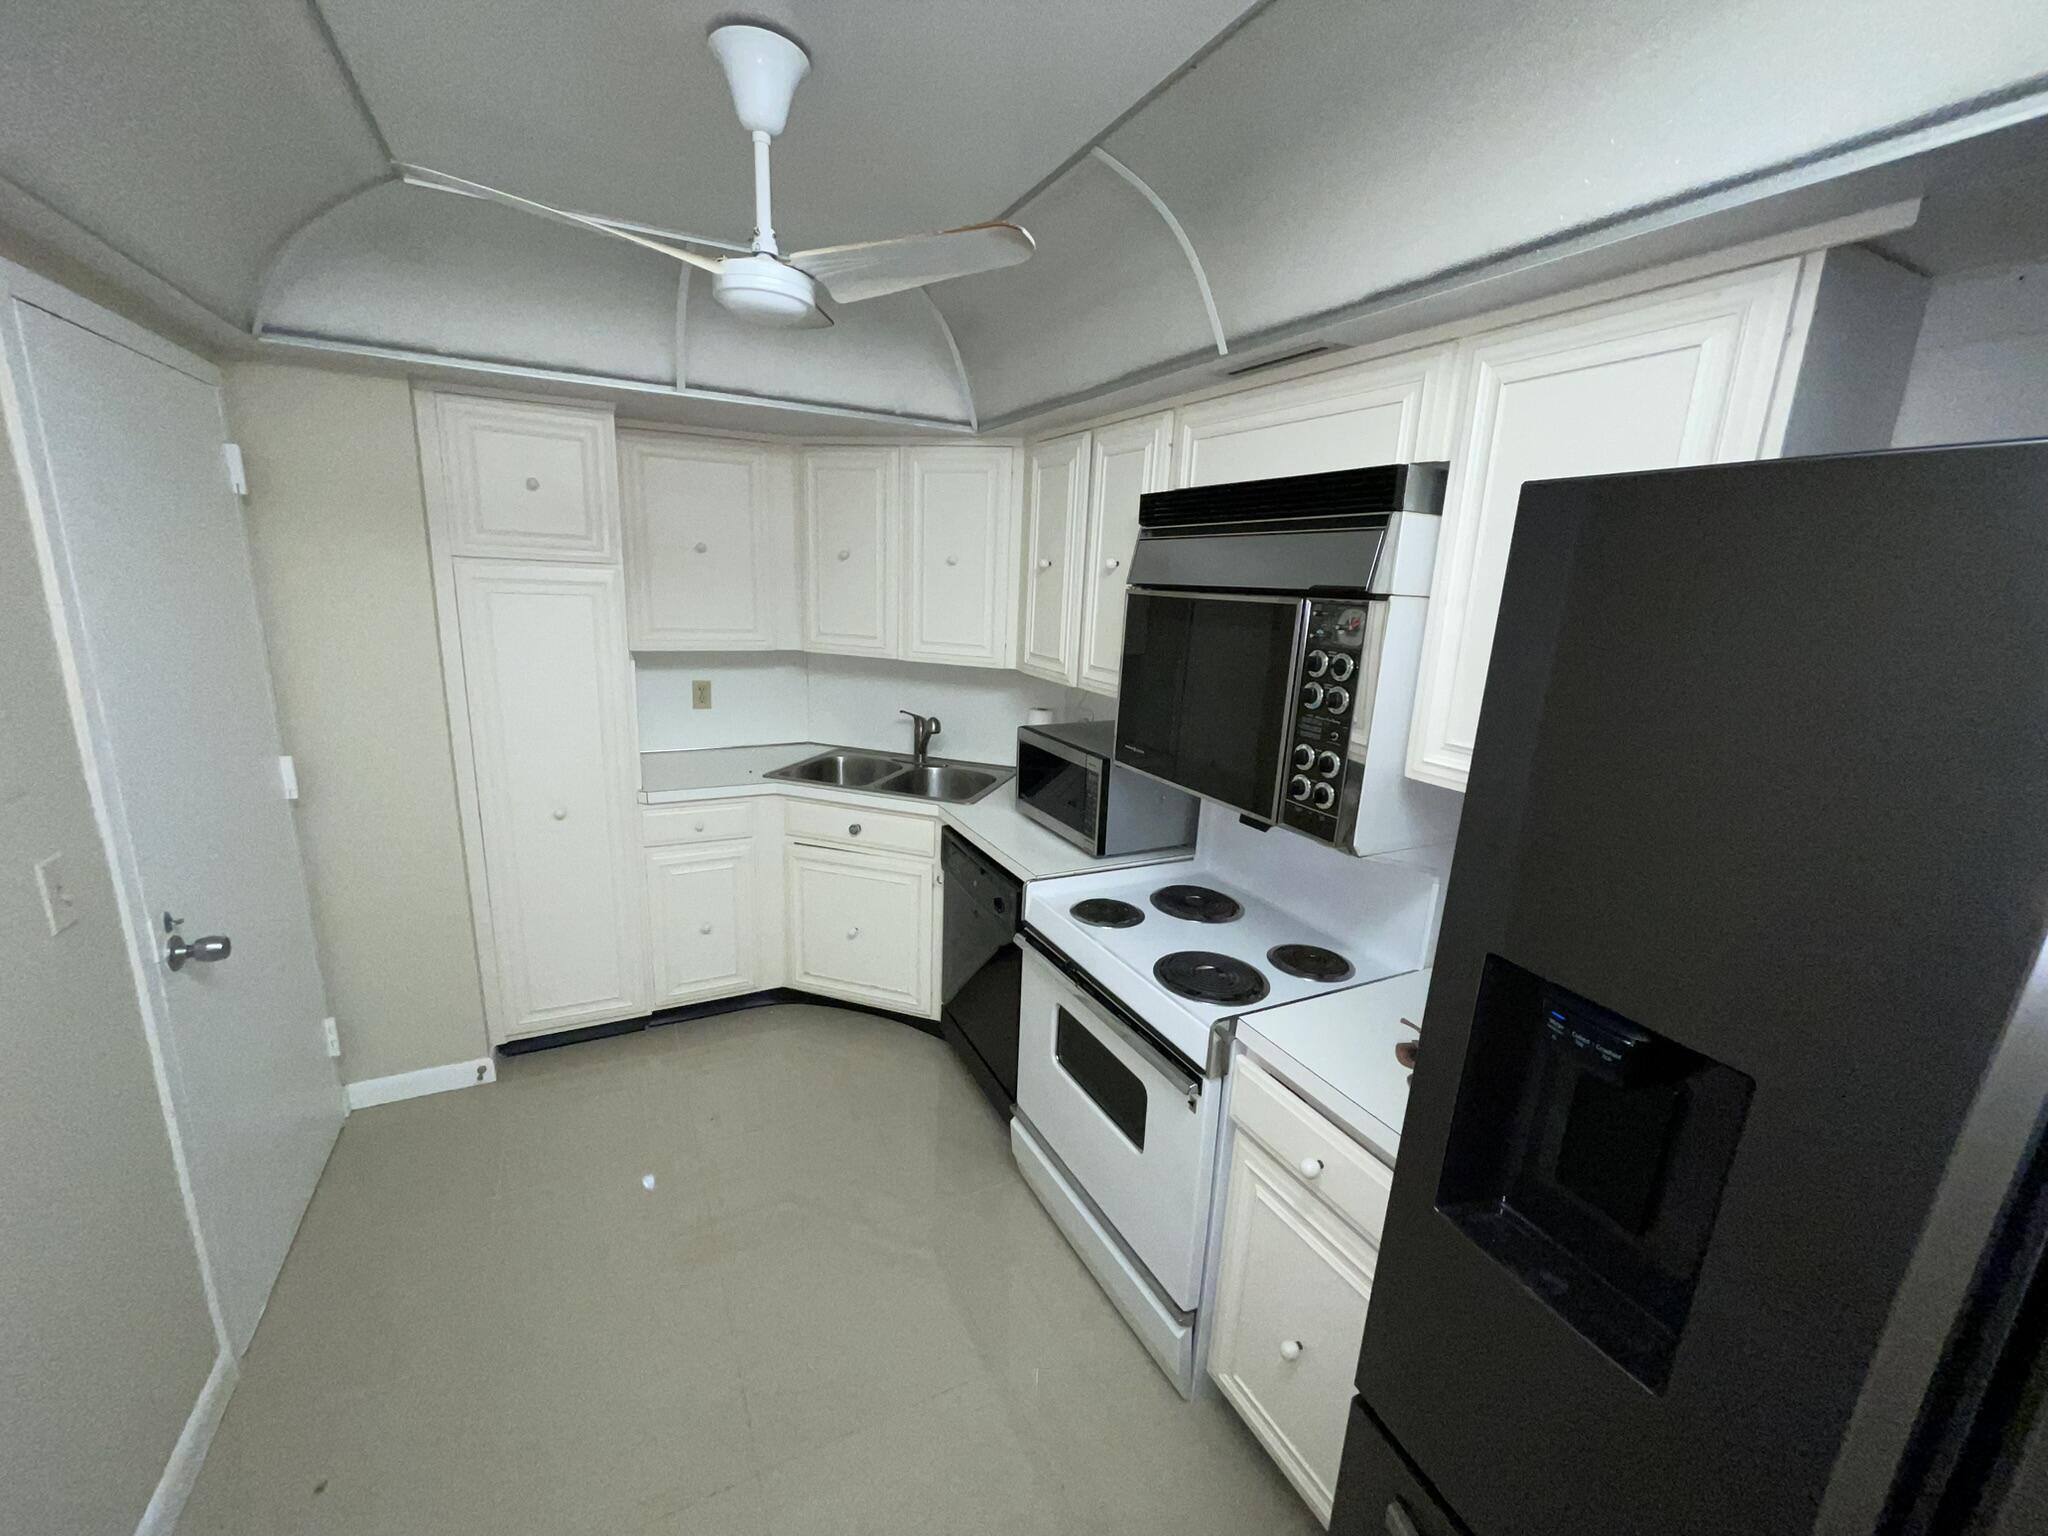 a kitchen with stainless steel appliances a stove refrigerator a sink dishwasher and a stove with wooden floor